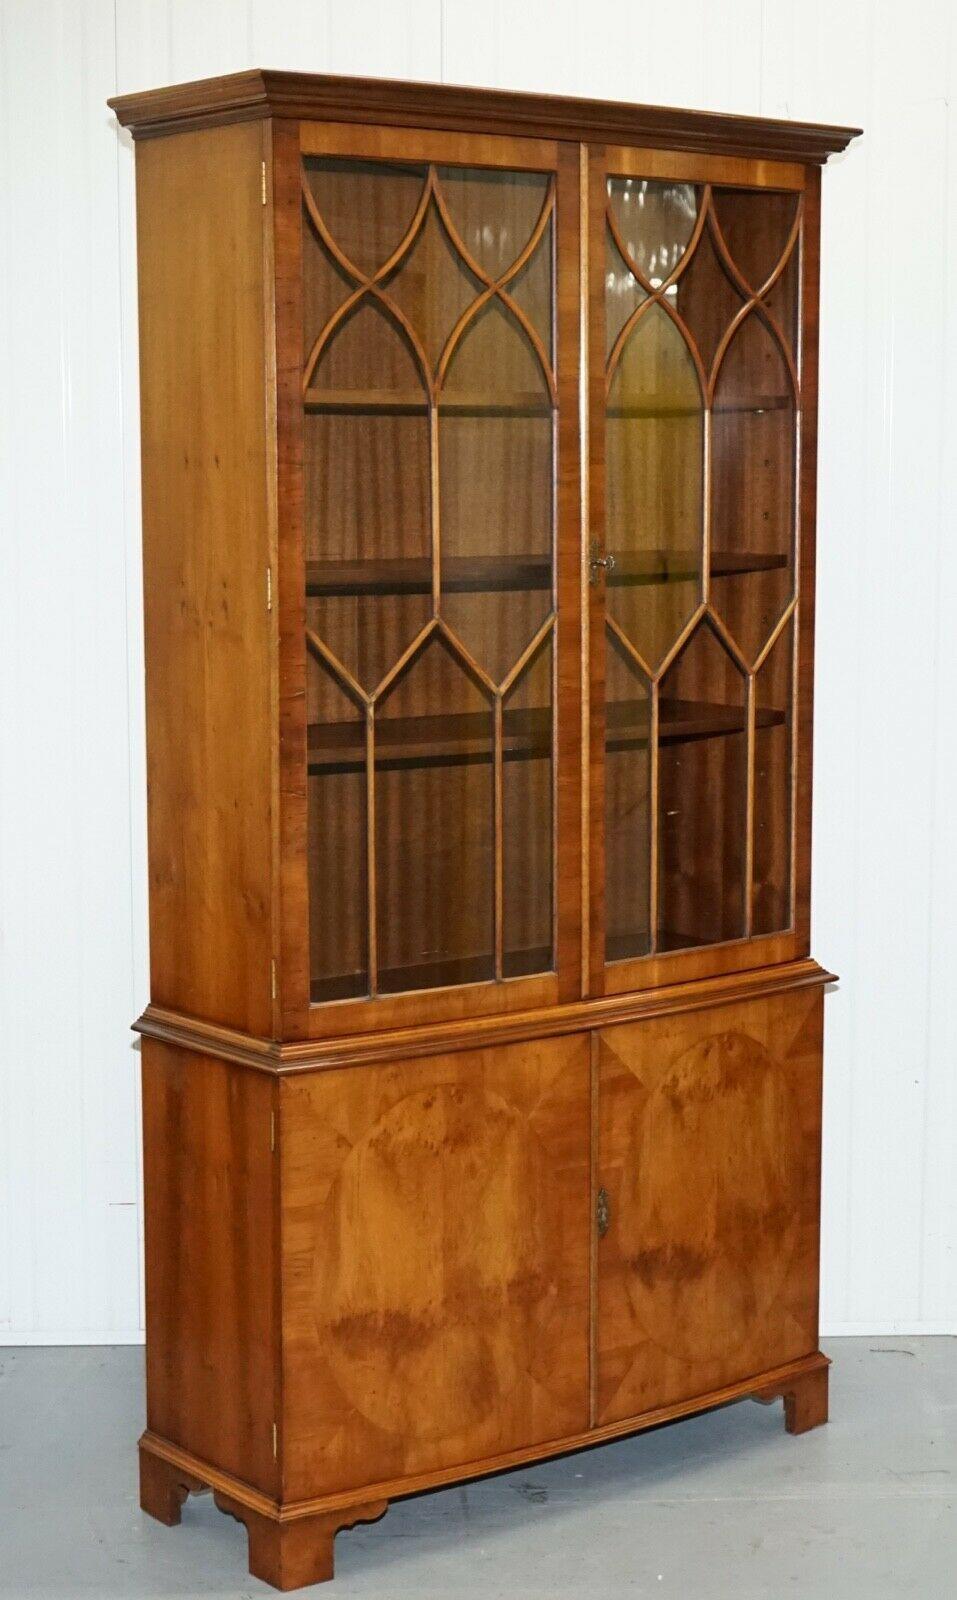 We are delighted to offer for sale this beautiful vintage burr yew wood display cabinet with glass doors. 

We have cleaned, waxed and polished it from top to bottom.

?

Dimensions

Height- 191cm

Width- 101cm

Depth- 35cm.
    